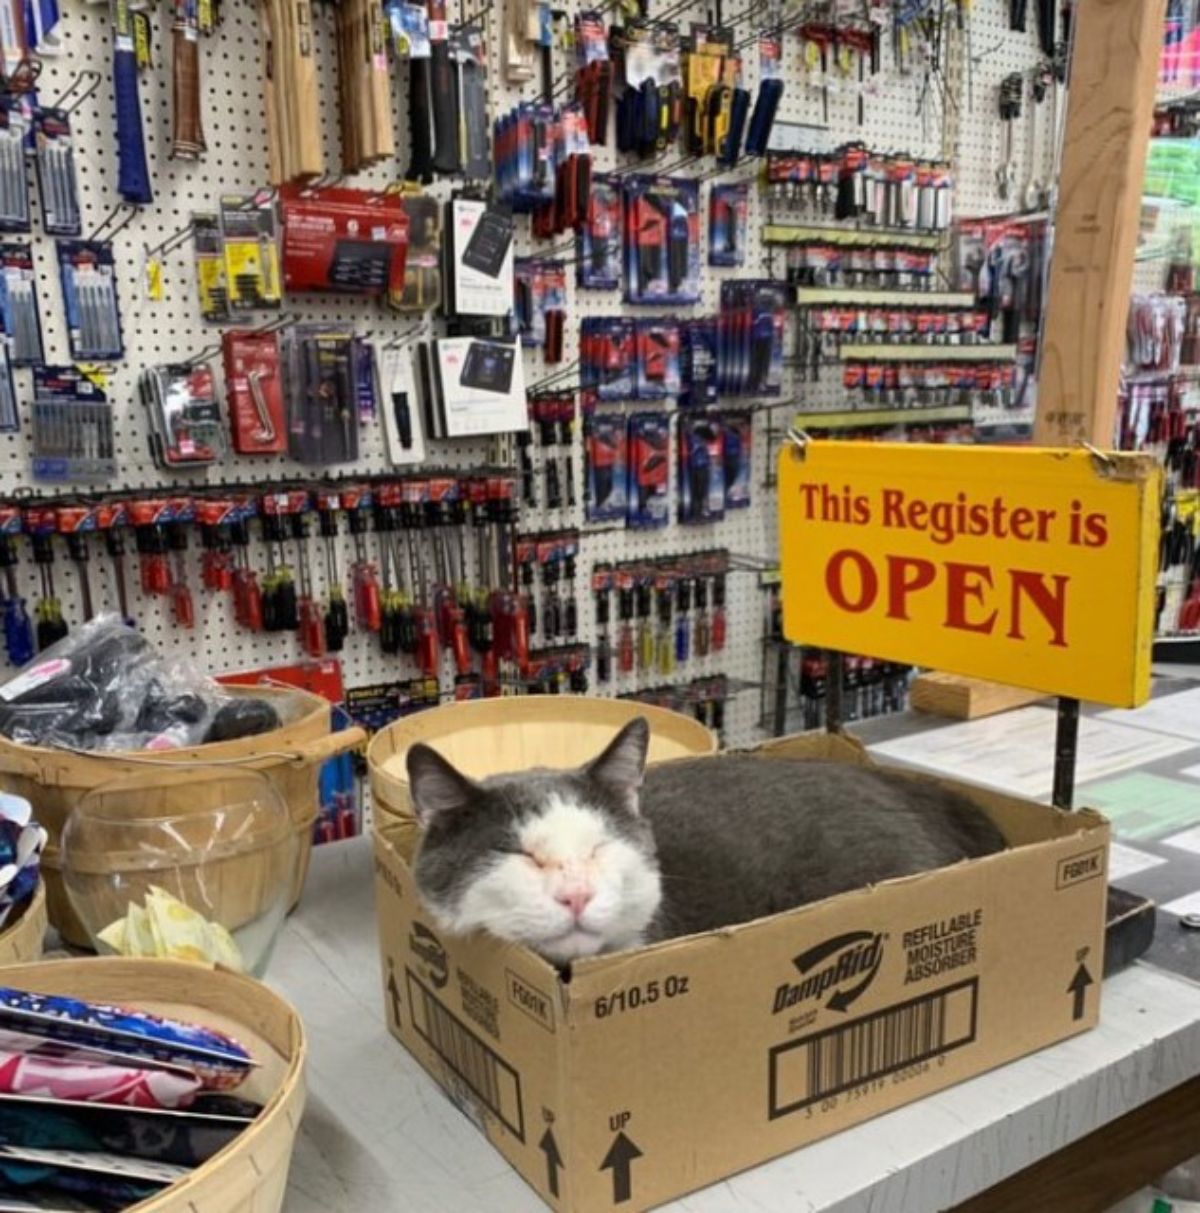 grey and white cat sleeping in a cardboard box with a sign saying This Register is OPEN